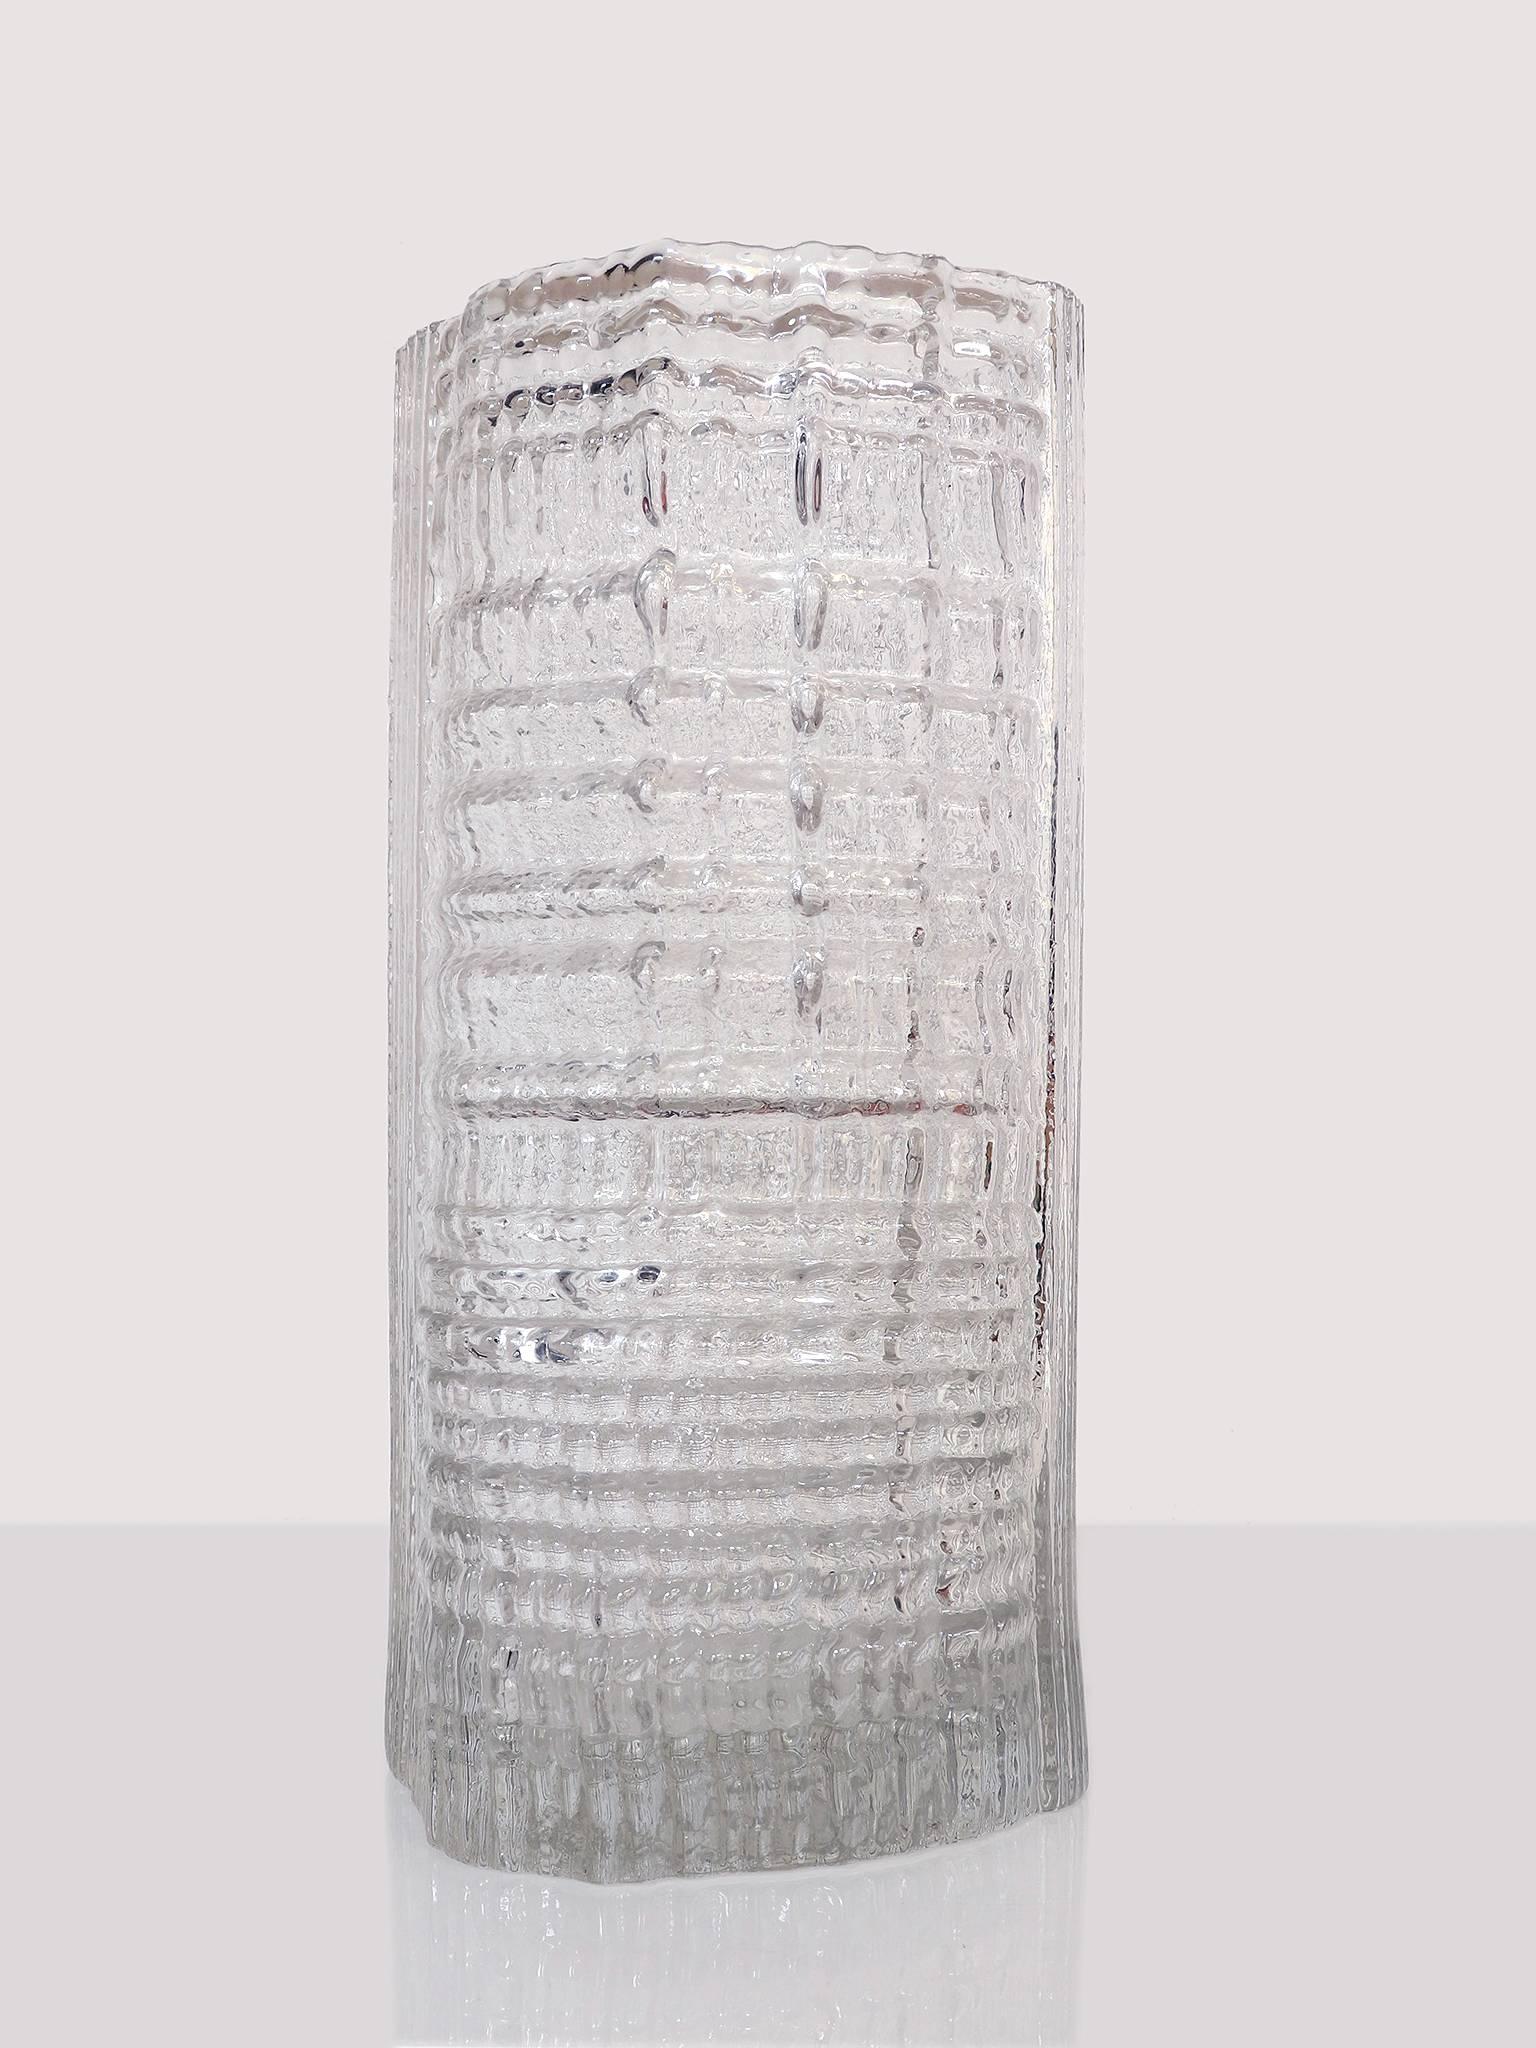 Huge sculptural iced, ribbed surface glass vase designed by Tapio Wirkkala for Rosenthal, Germany in the 1950s. 
Signed to bottom with 